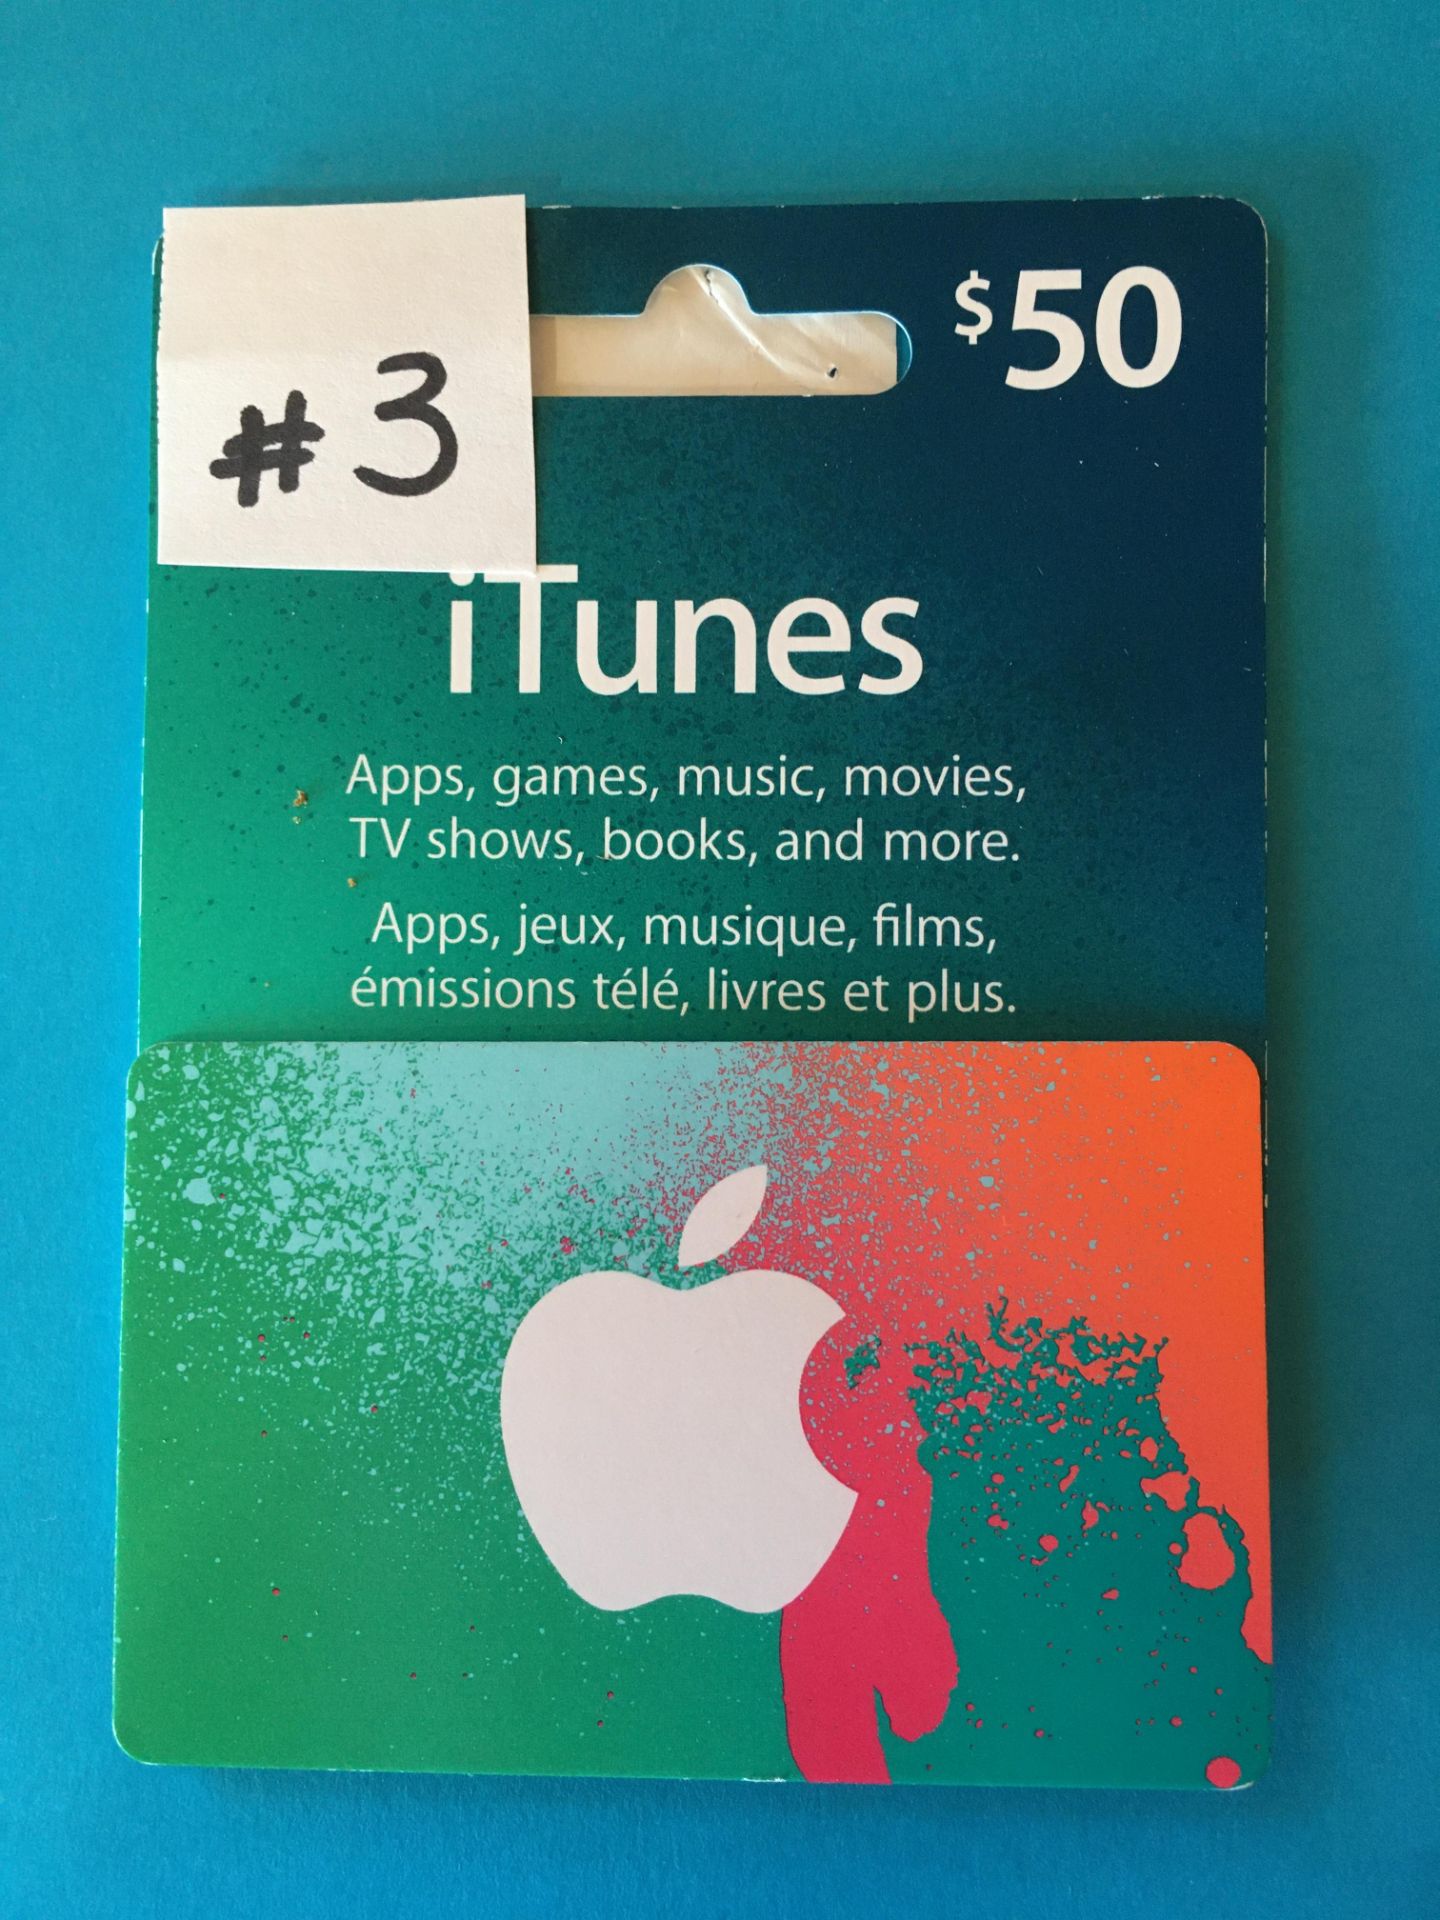 $50.00 iTunes GIFT CARD Donated by: RCS Value: $50.00